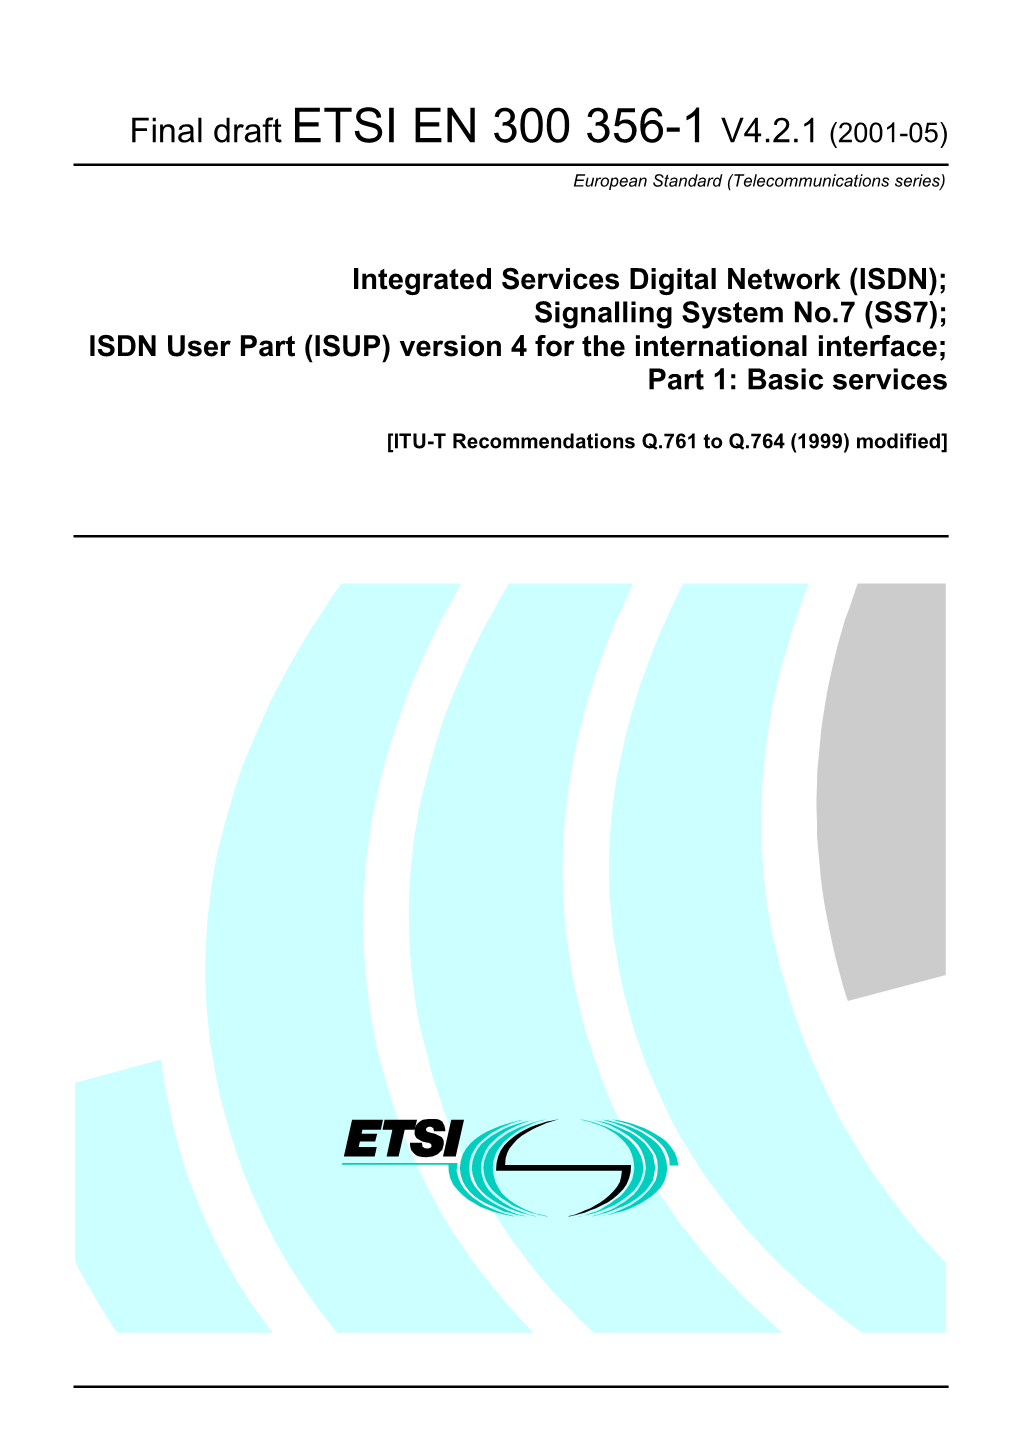 ISUP) Version 4 for the International Interface; Part 1: Basic Services